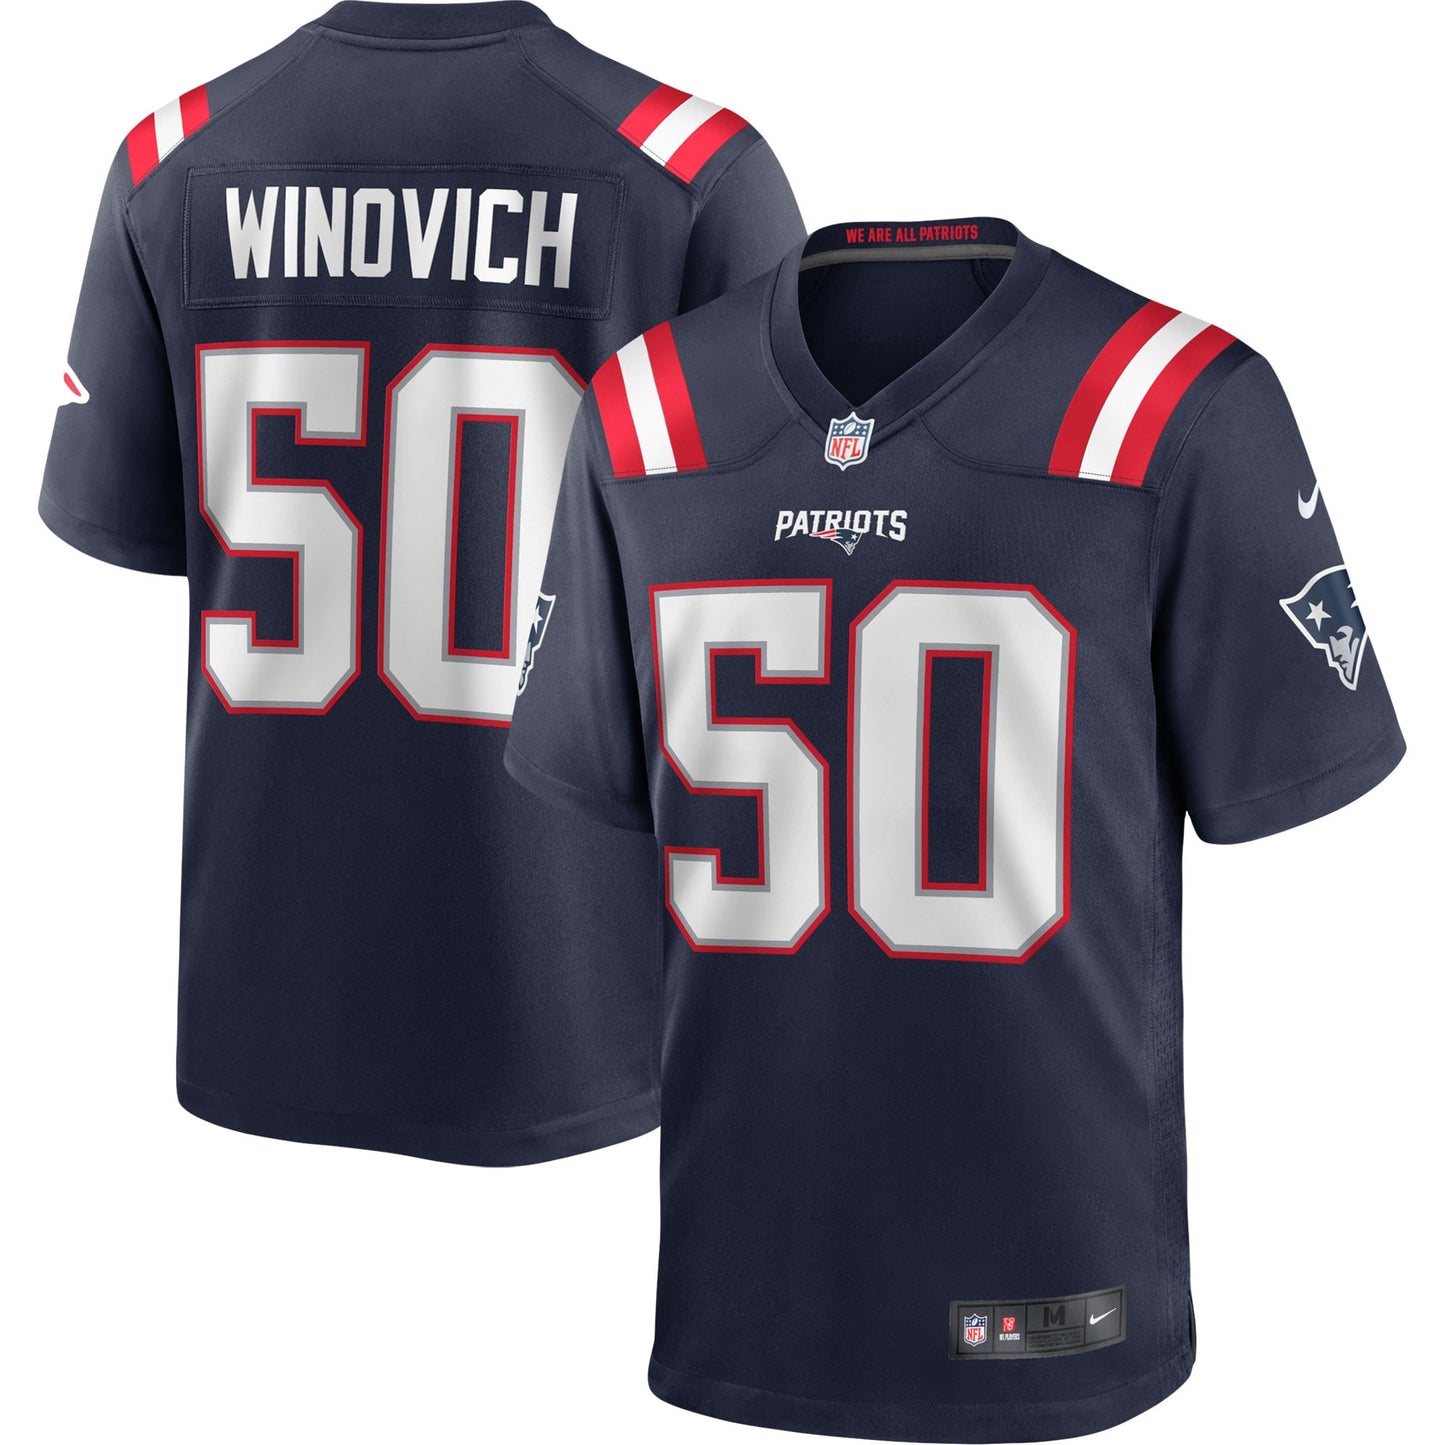 Chase Winovich New England Patriots Nike Game Player Jersey - Navy